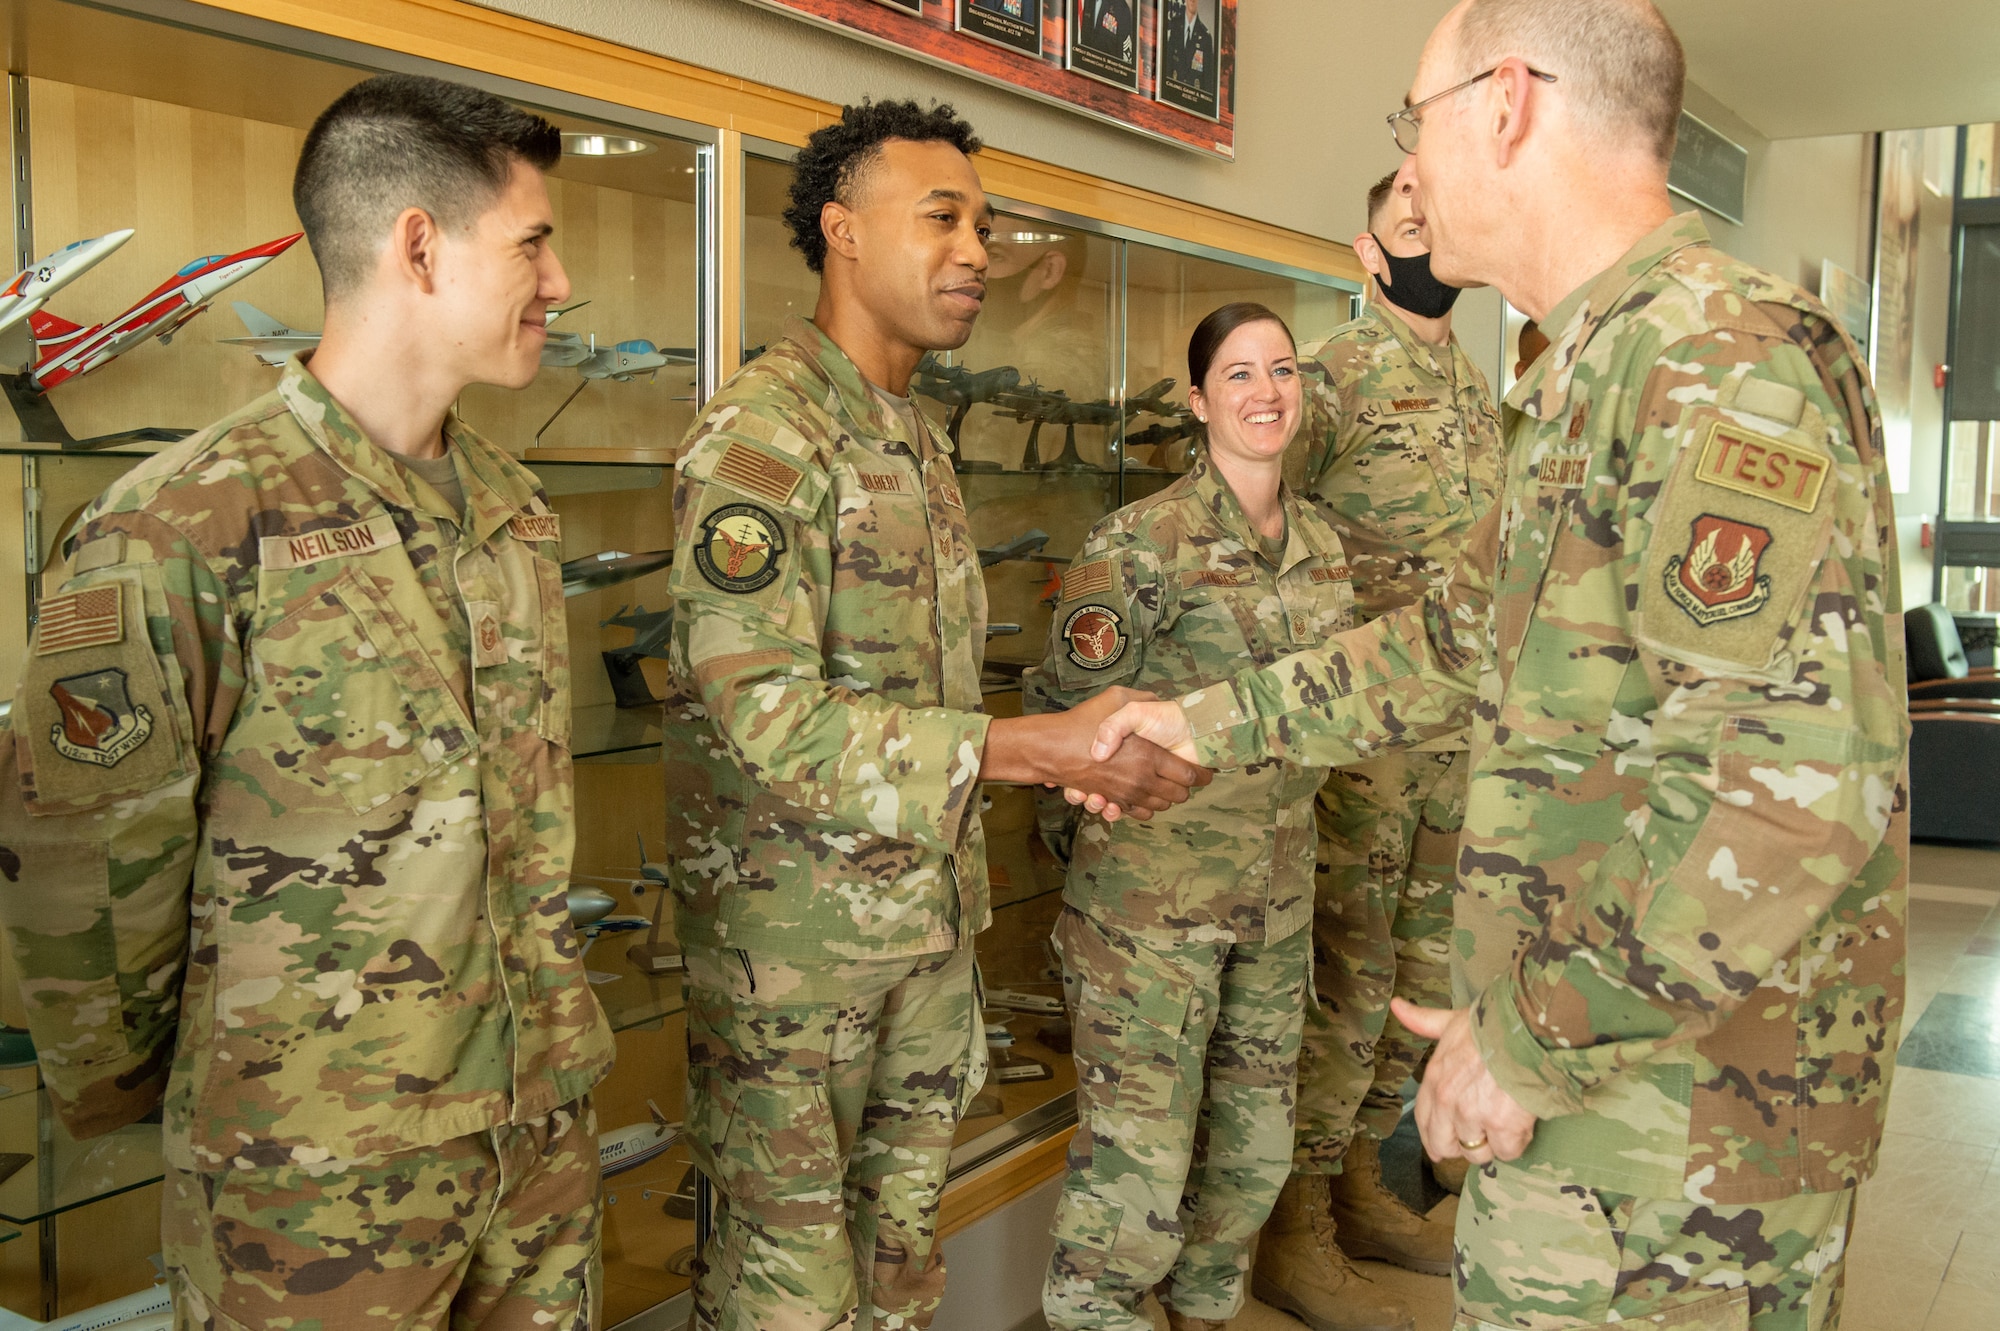 Tech. Sgt. Ruben Tolbert, 412th Medical Group, receives a coin from Gen. Duke Z. Richardson, Air Force Materiel Command commander, on Edwards Air Force Base, California, July 14. (U.S. Air Force photo by Lisa Dixon)